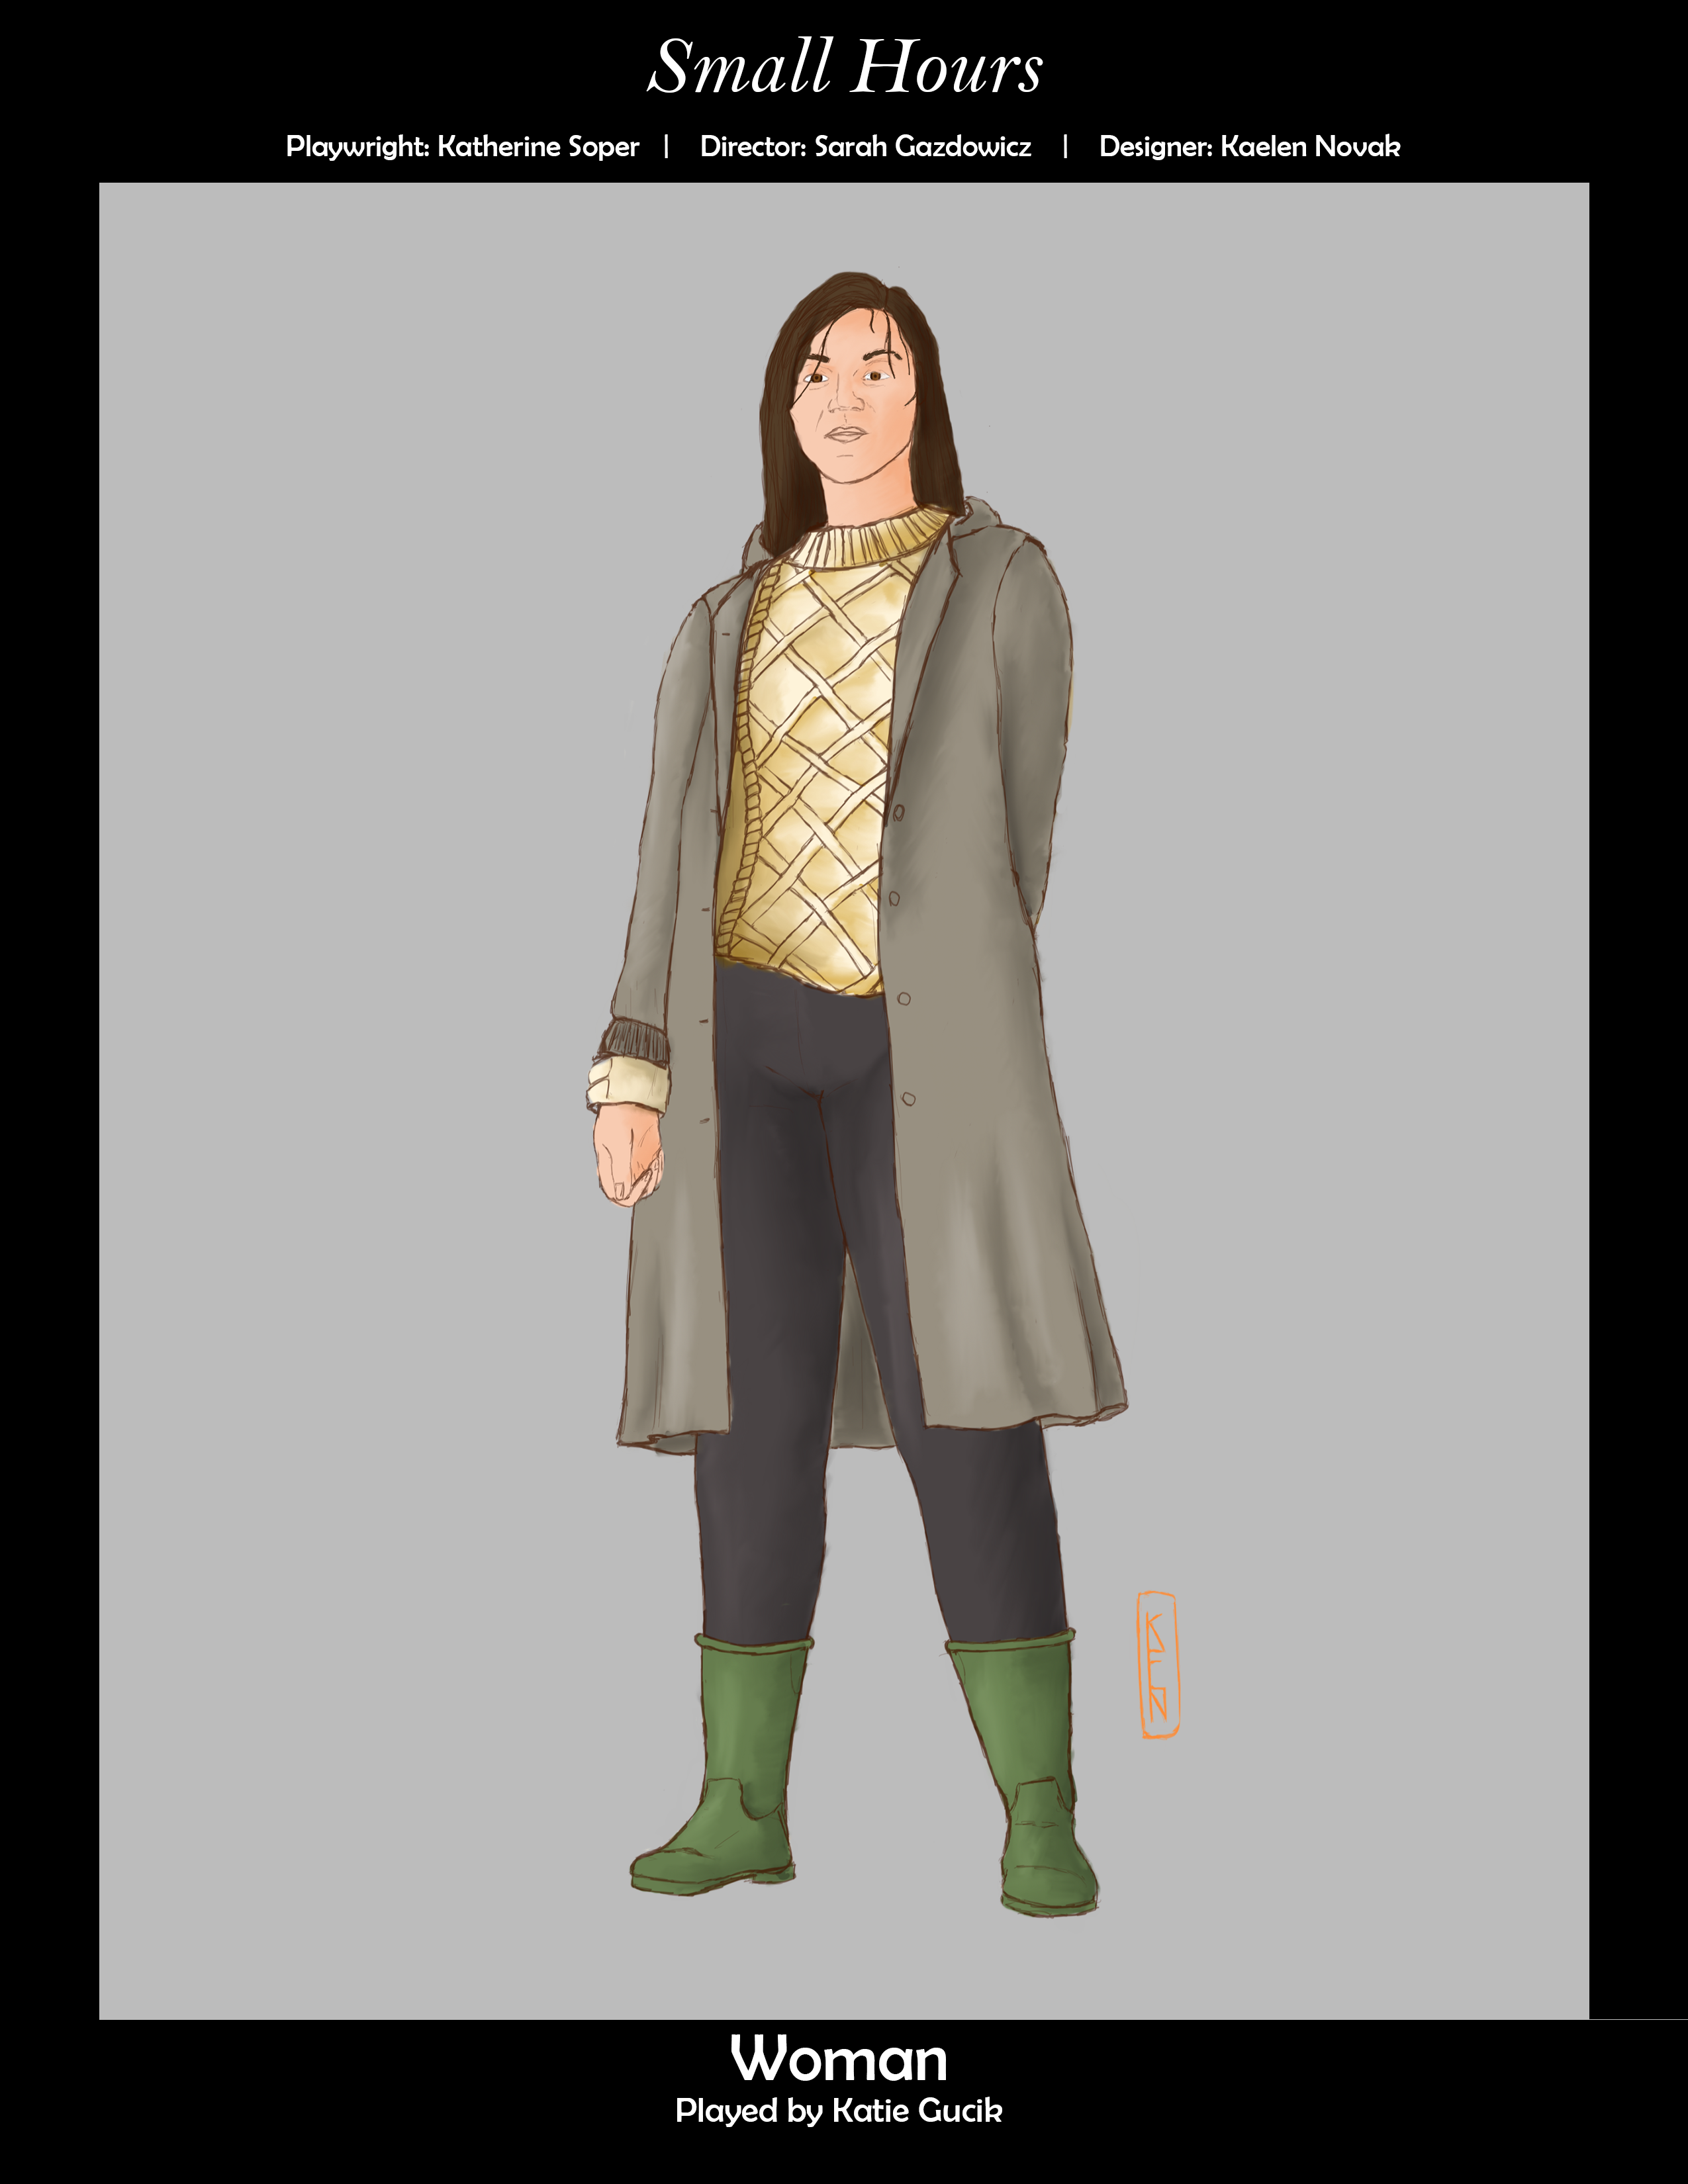 Costume rendering for small hours.